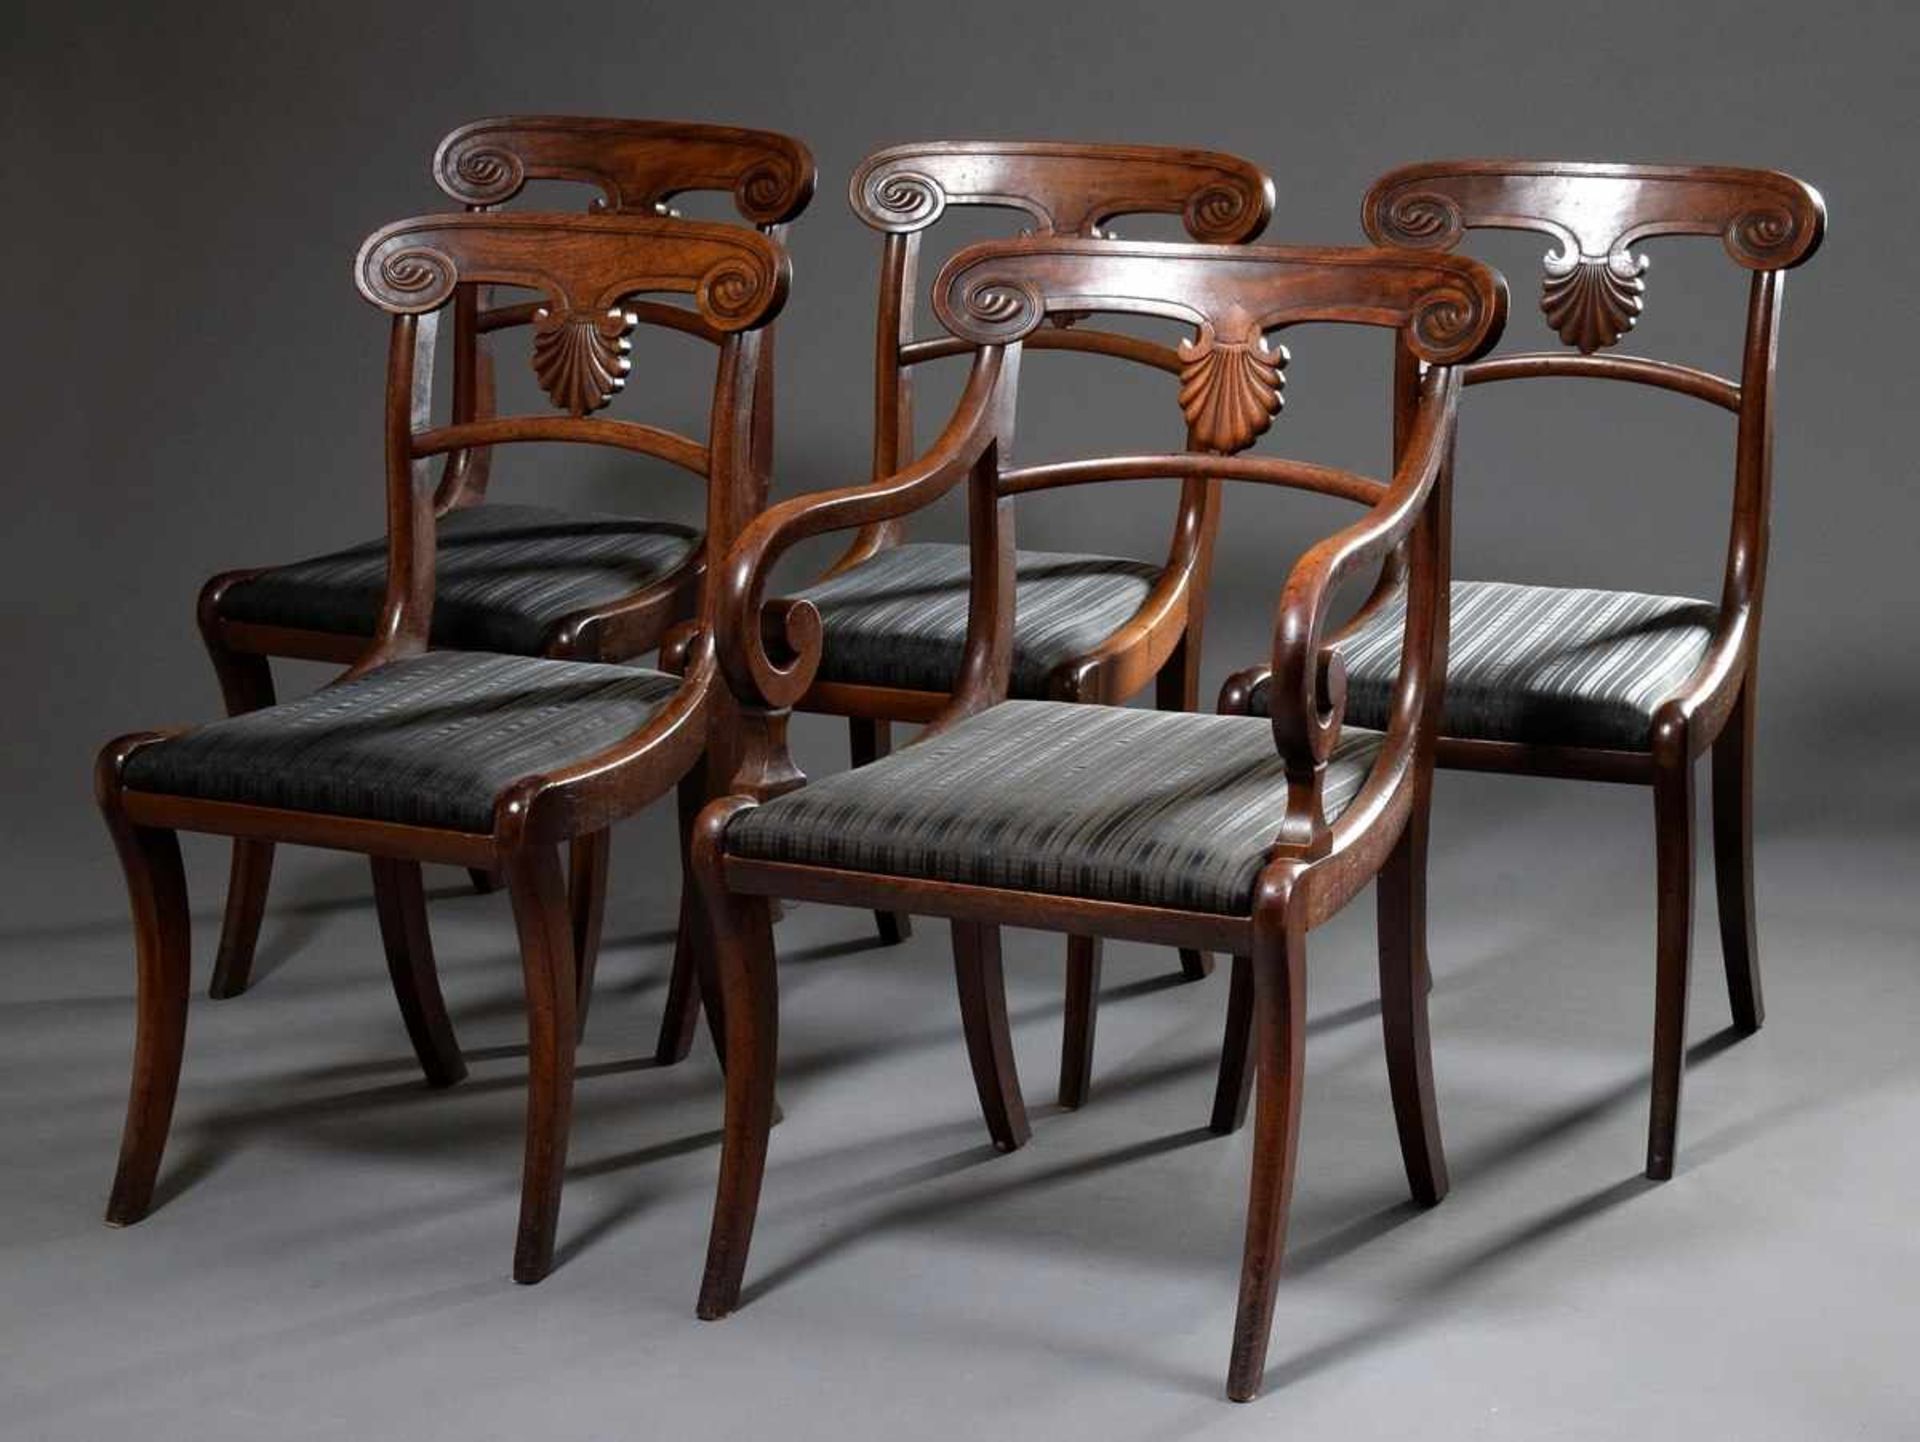 5 English Sheraton chairs with carved backrests and sabre legs, 1x with armrests, mahogany, - Image 2 of 7